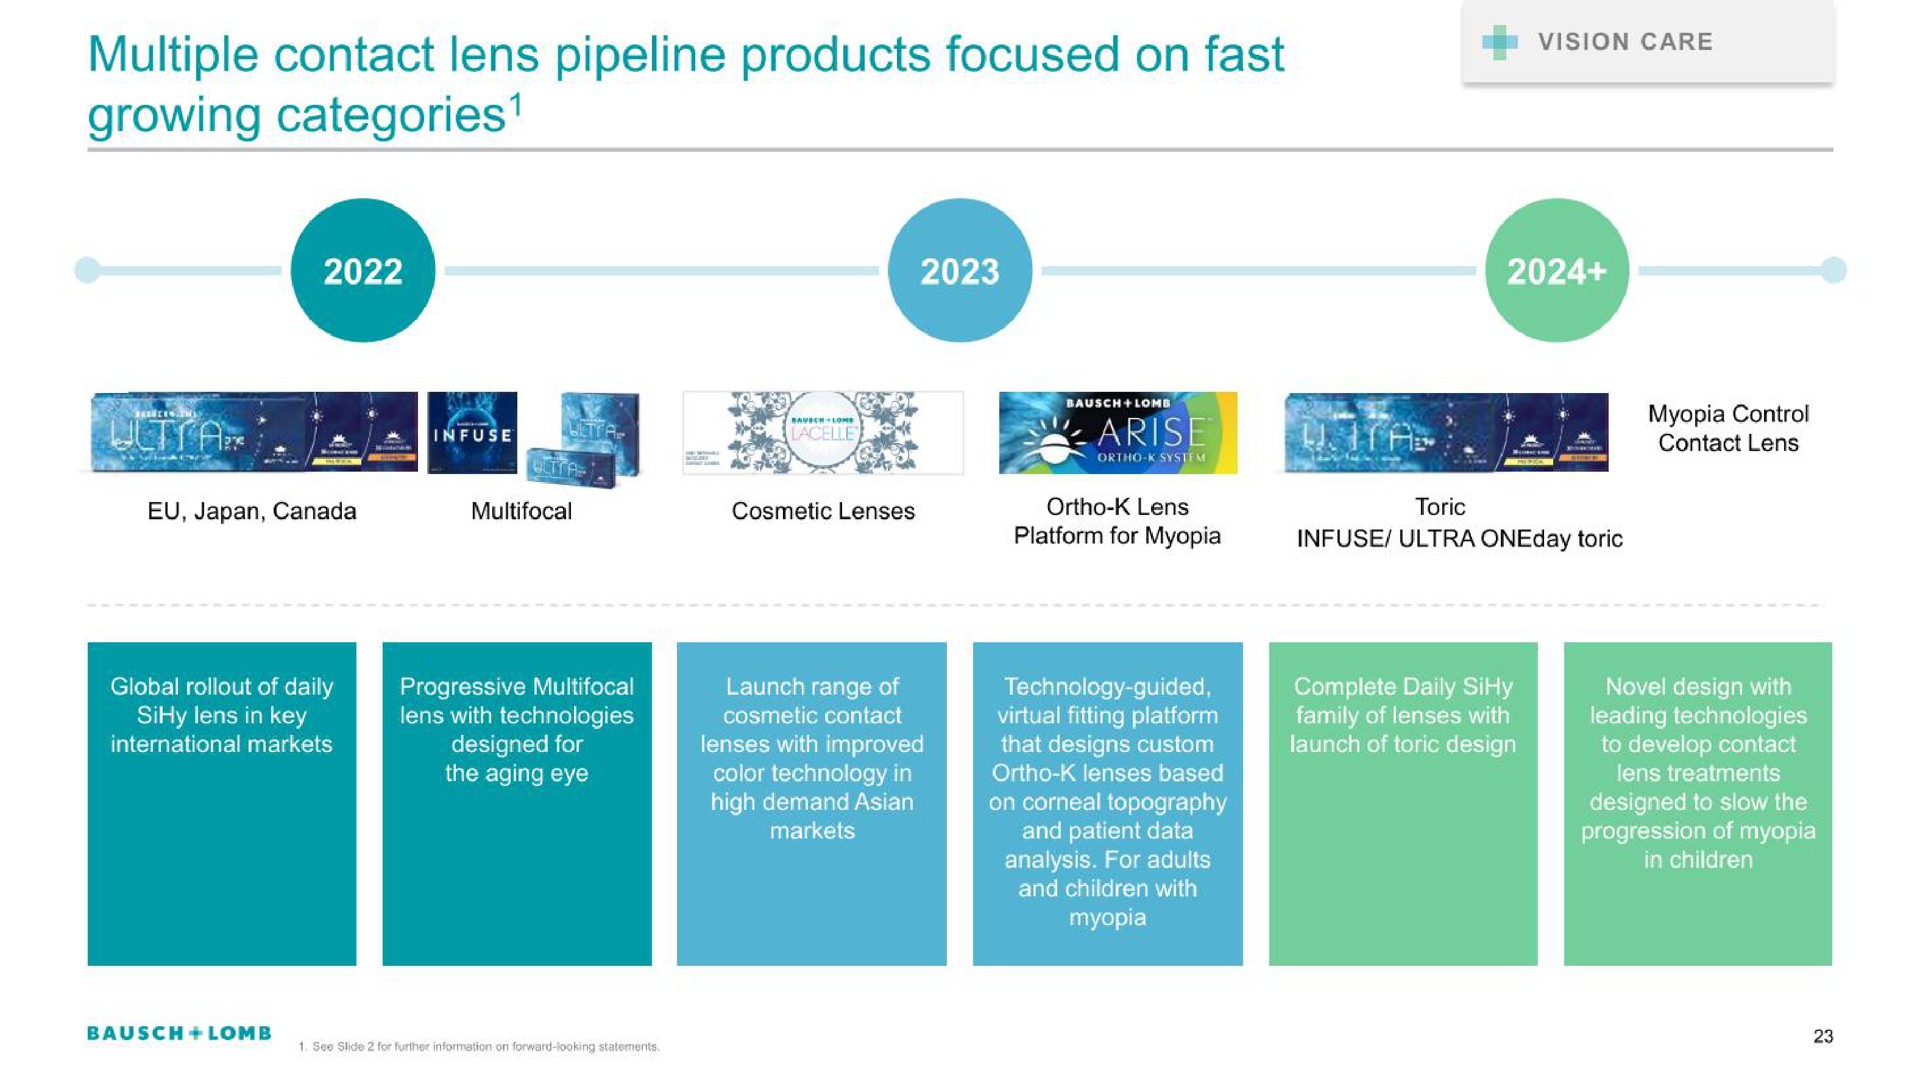 multiple contact lens pipeline products focused on fast growing categories | Bausch+Lomb